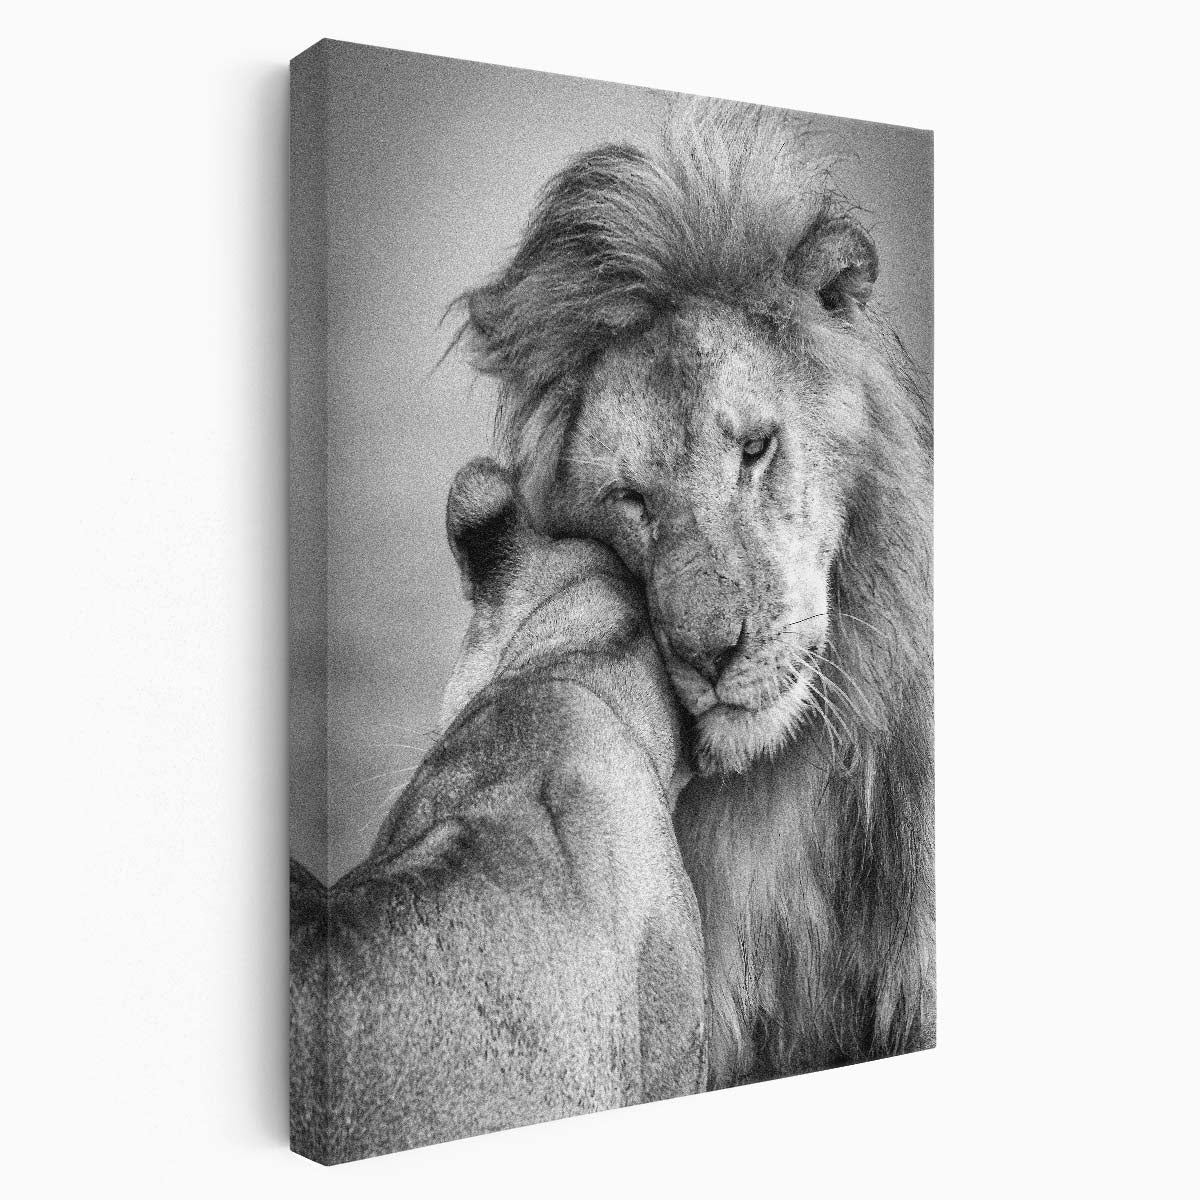 Romantic Lion Couple in Tanzania Wildlife Photography Wall Art by Luxuriance Designs, made in USA